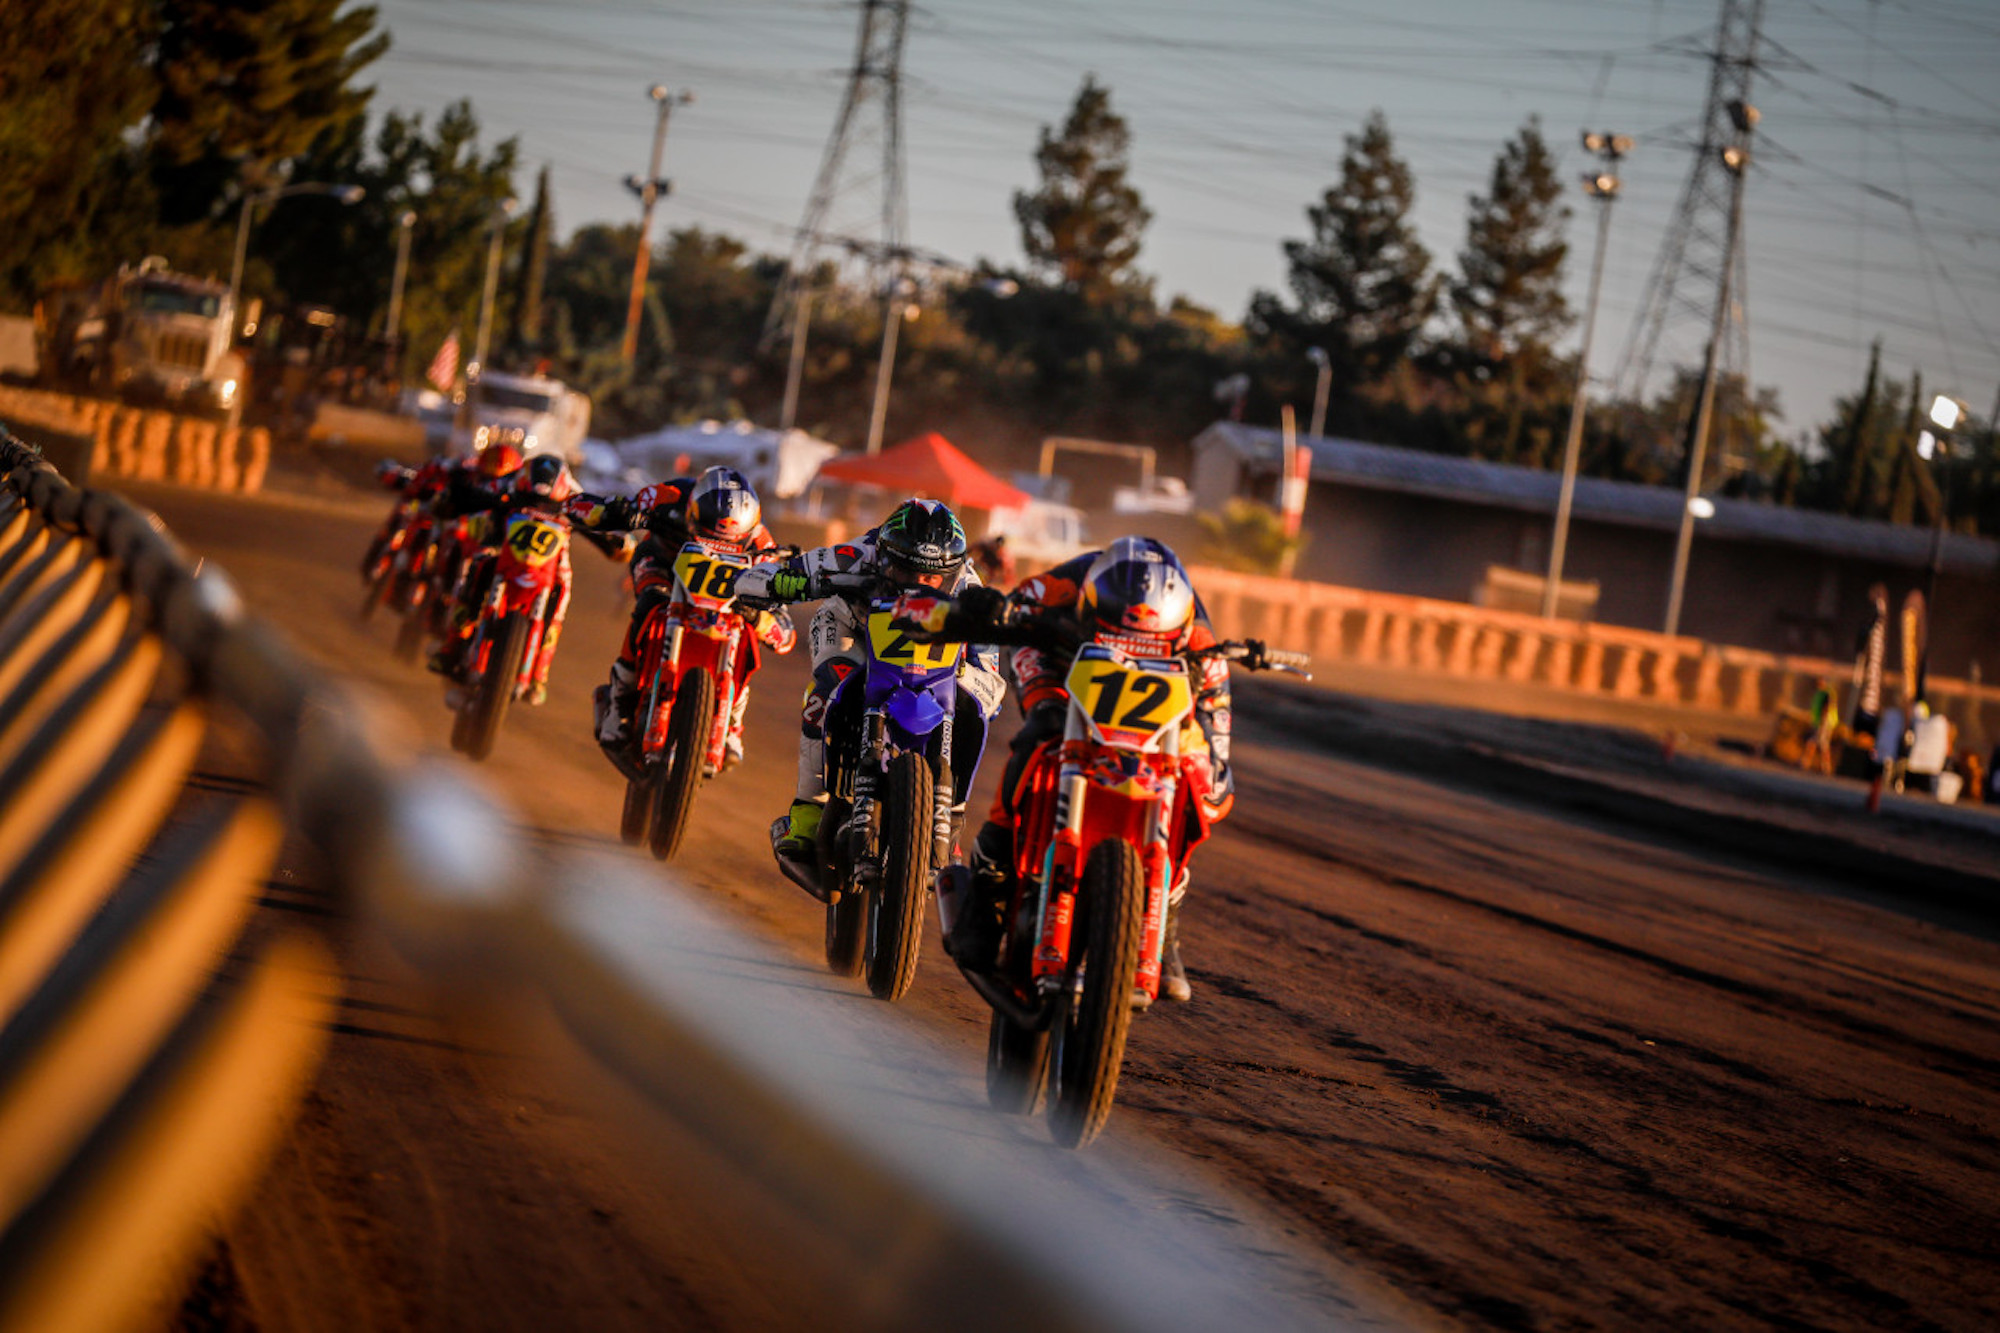 A view of last year's American Flat Track efforts. Media sourced from Progressive AFT. 